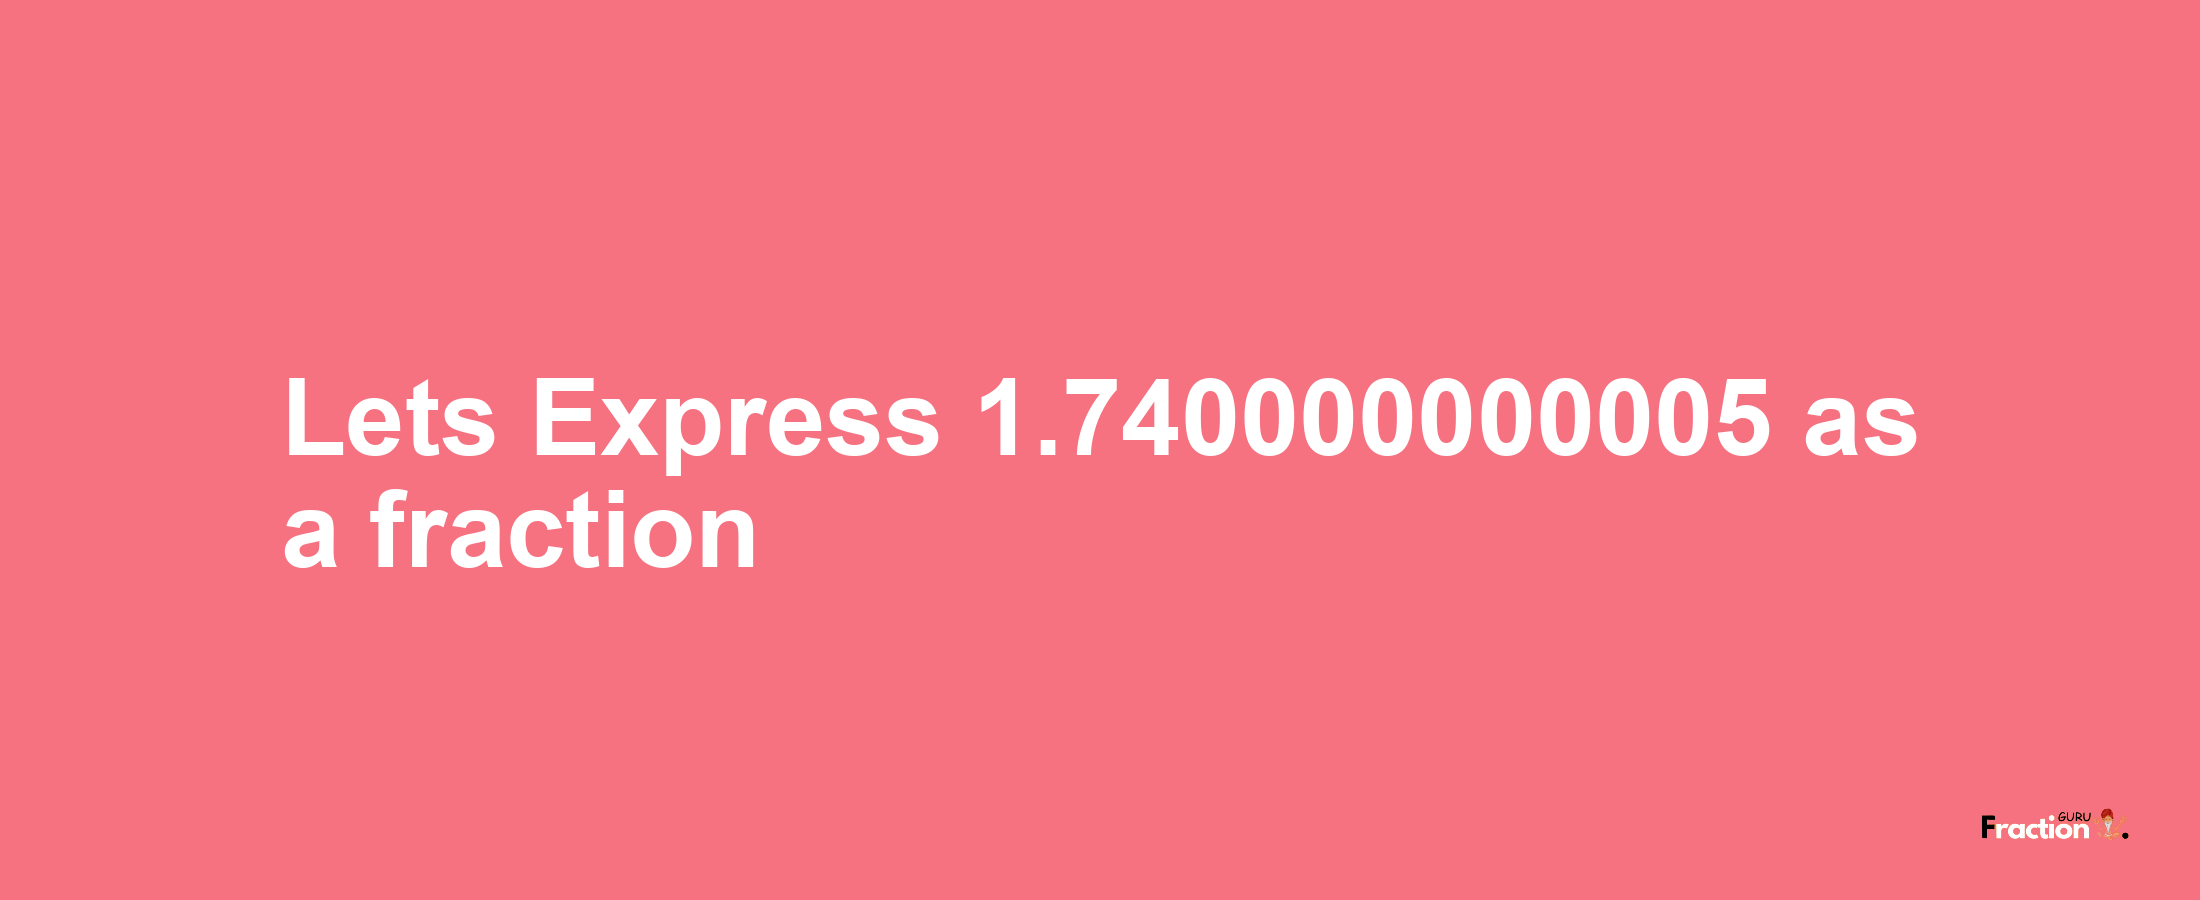 Lets Express 1.740000000005 as afraction